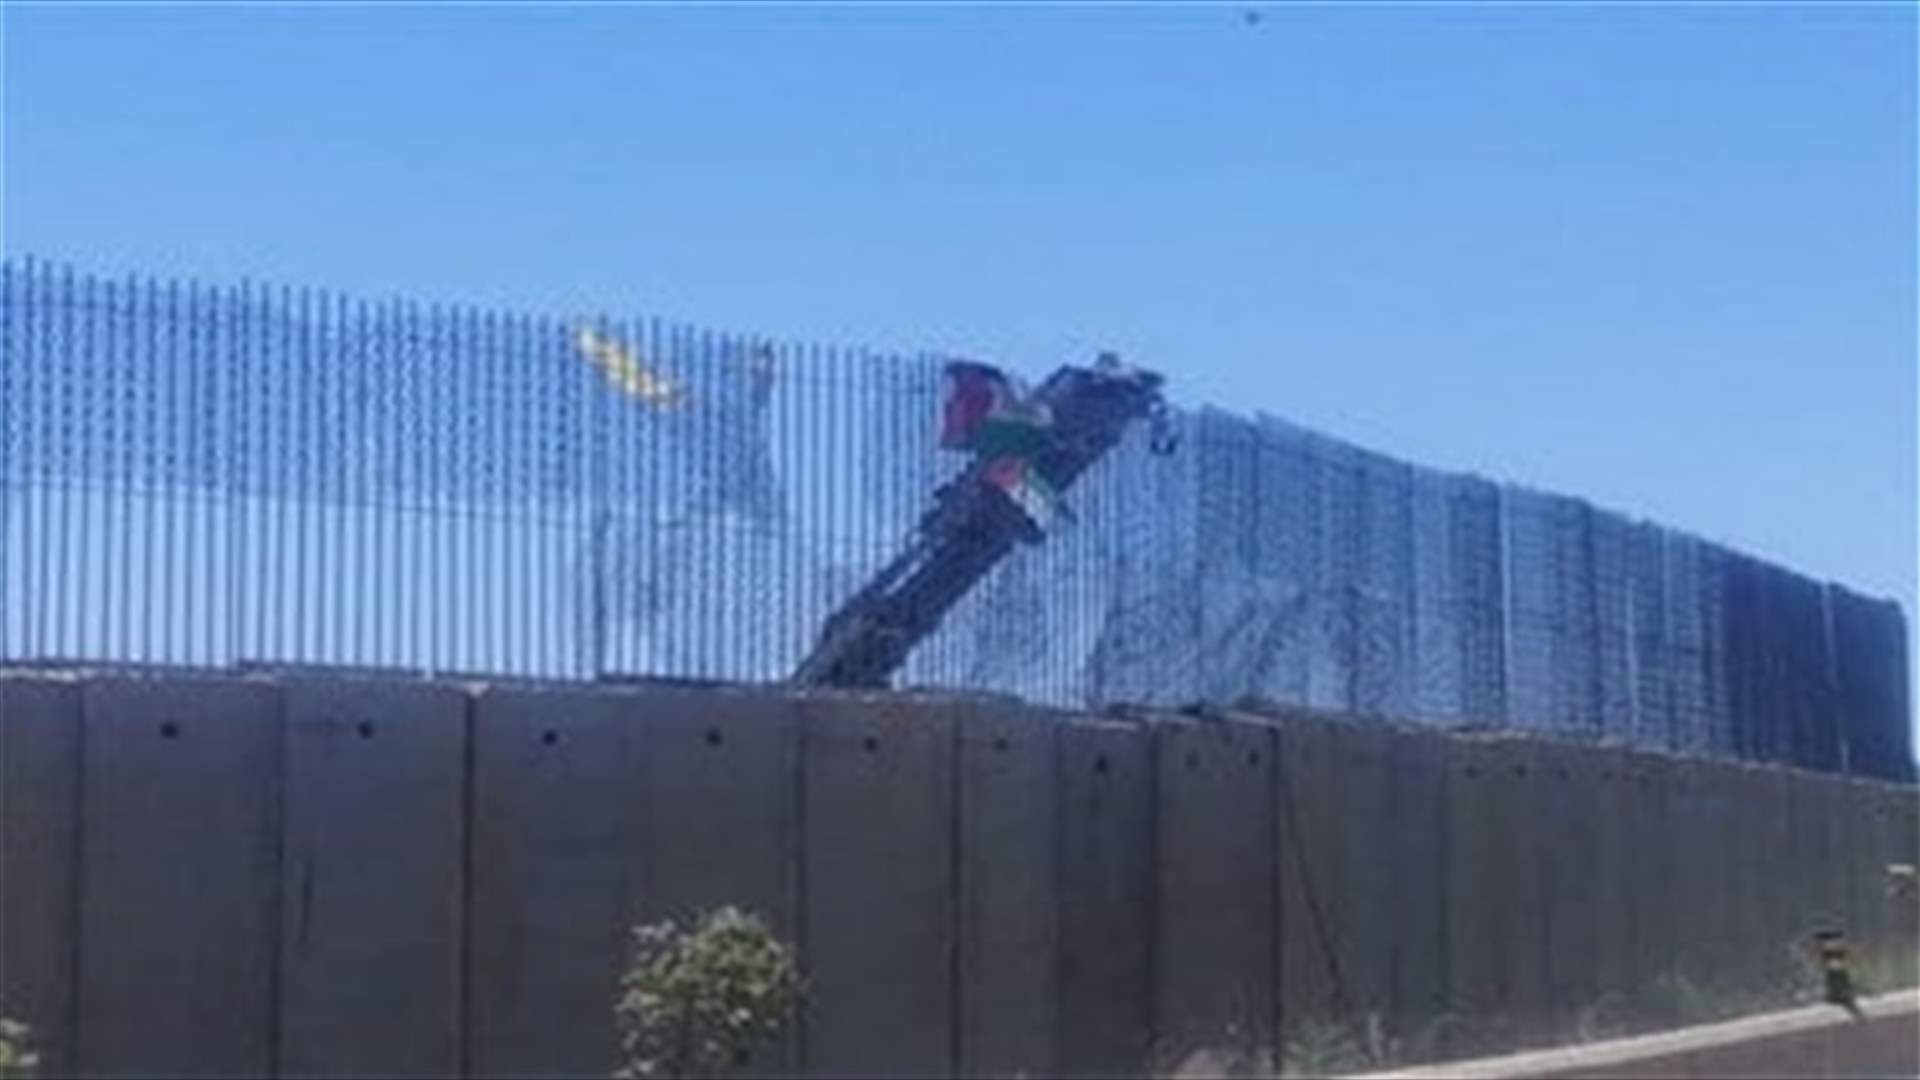 Israeli forces carry out maintenance works on borders